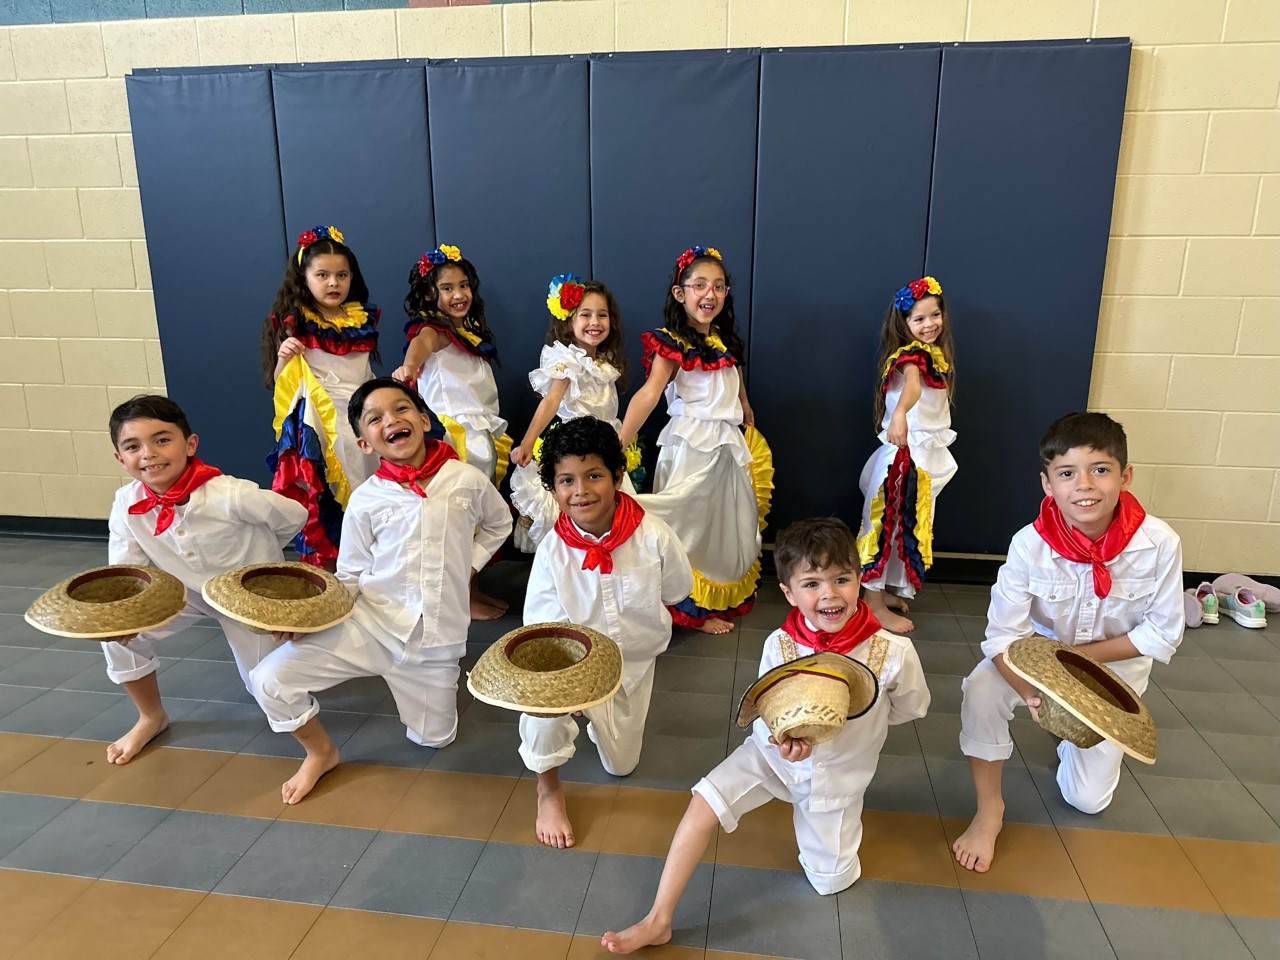 Students at Milam performed a Mother's Day Folkloric tribute!